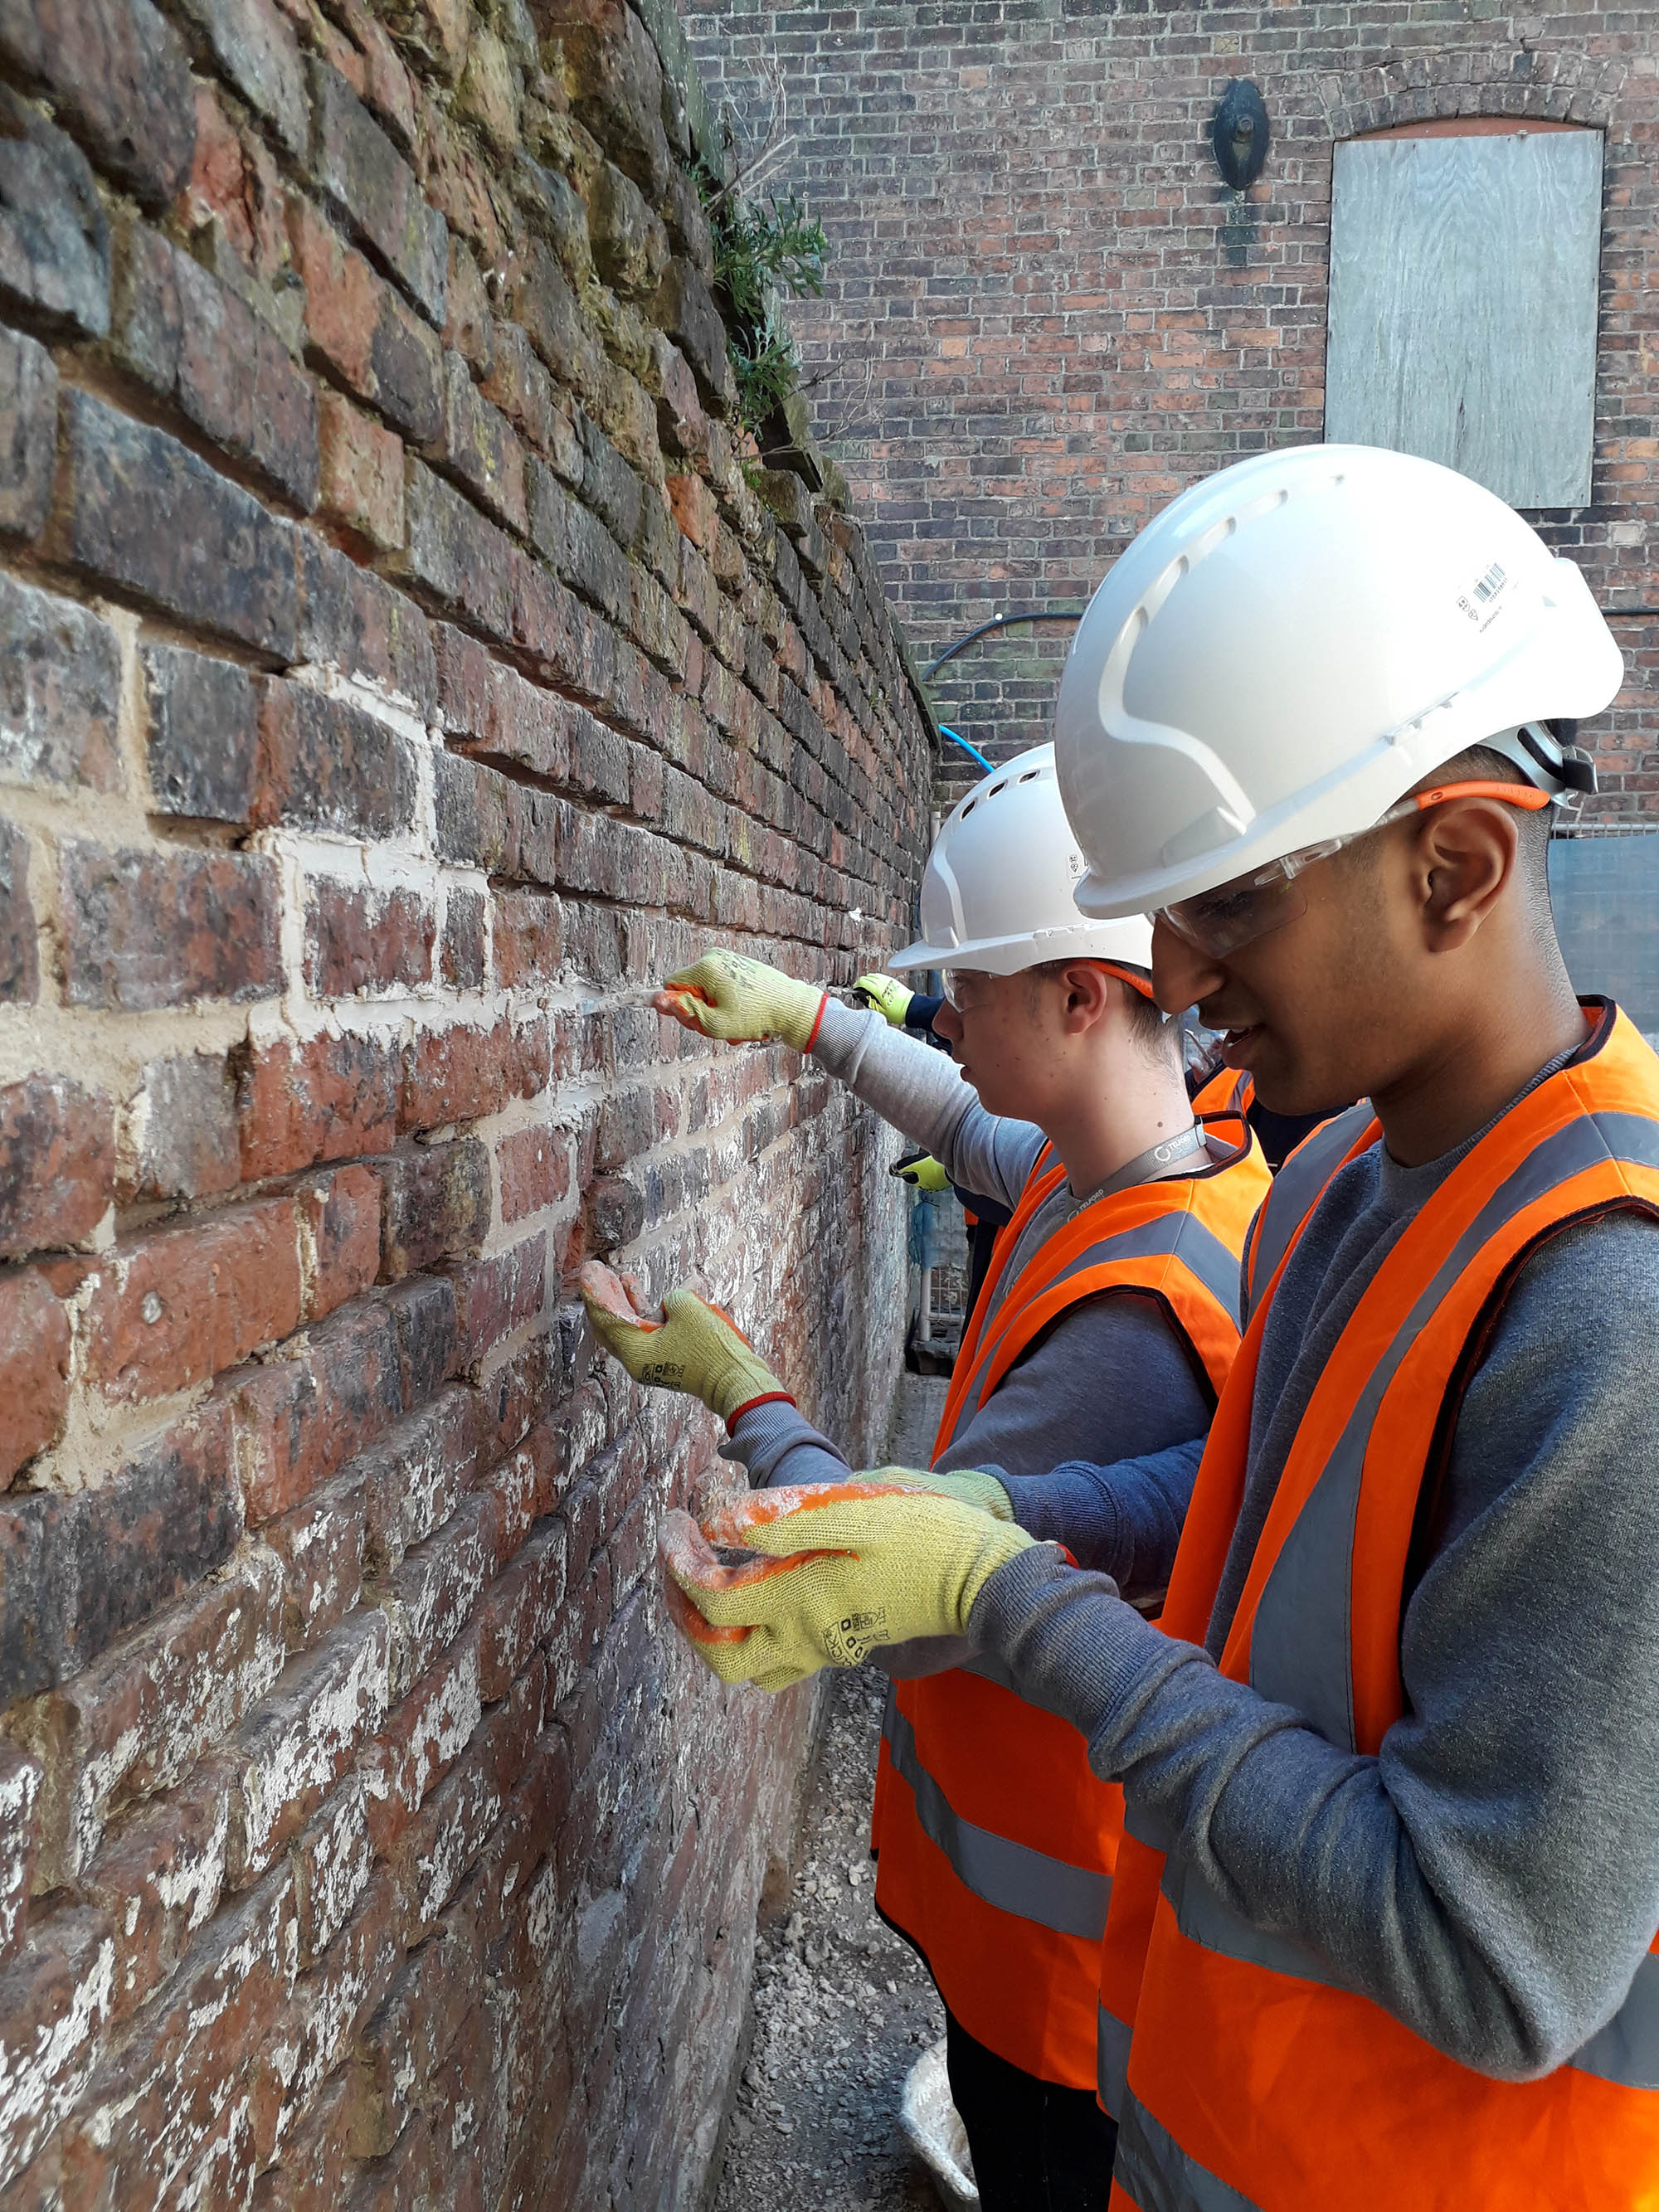 Construction students had a practical session in using traditional lime mortar for repointing.